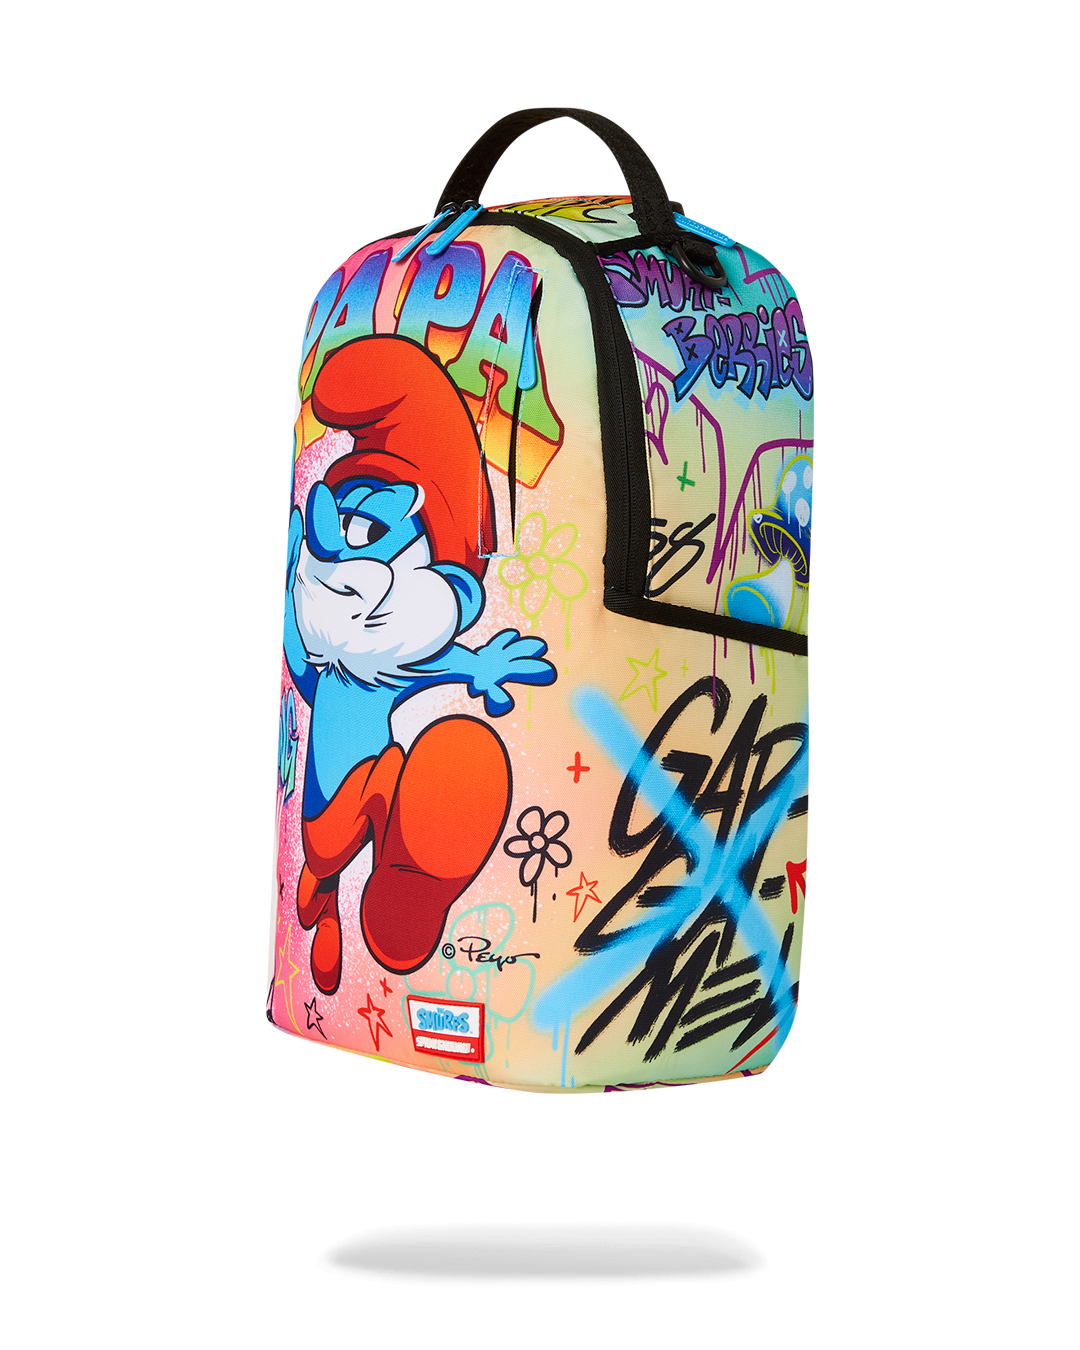 SPRAYGROUND SMURF BACKPACK TOUGH SMURFS New In Bag LIMITED EDITION